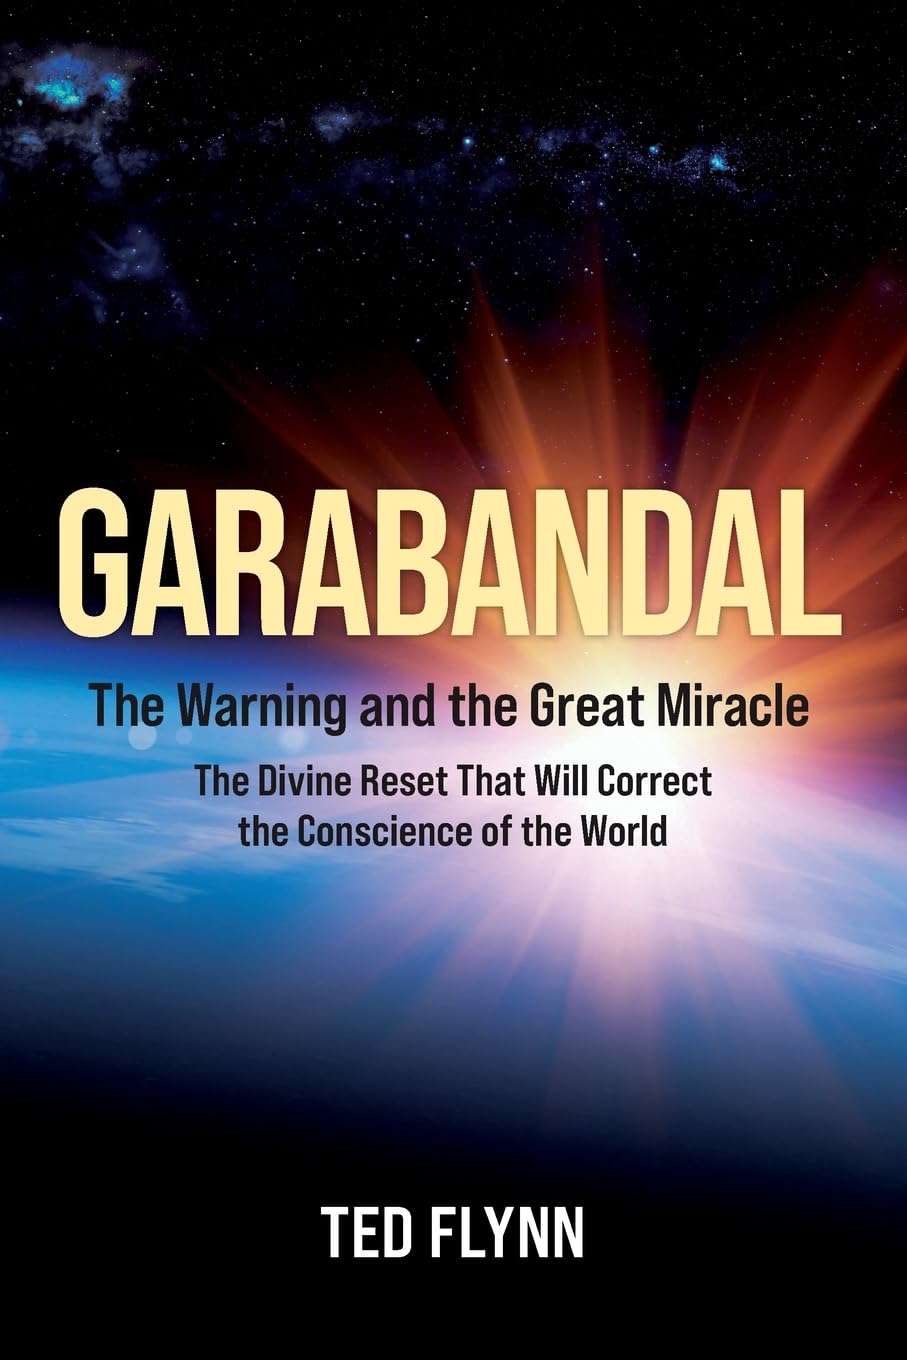 Garabandal -- the Warning and the Great Miracle: The Divine Reset That Will Correct the Conscience of the World